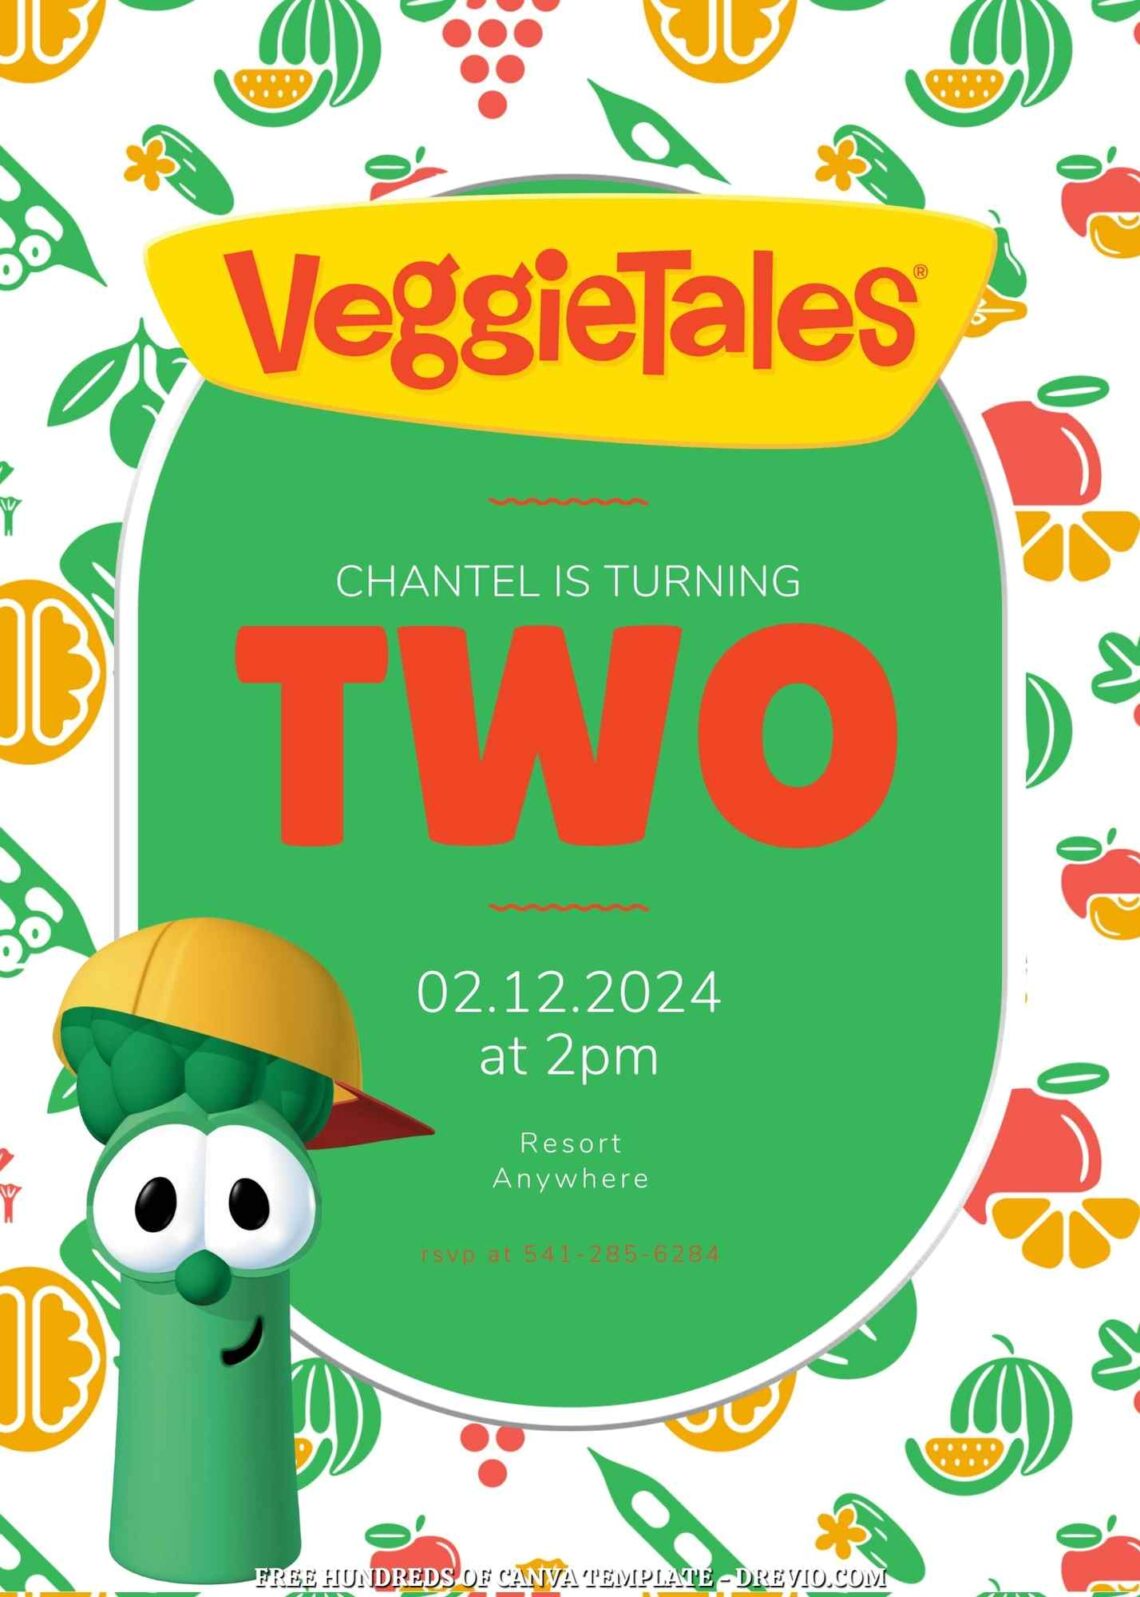 Free VeggieTales Birthday Invitations with Vegetable Drawing in the Background